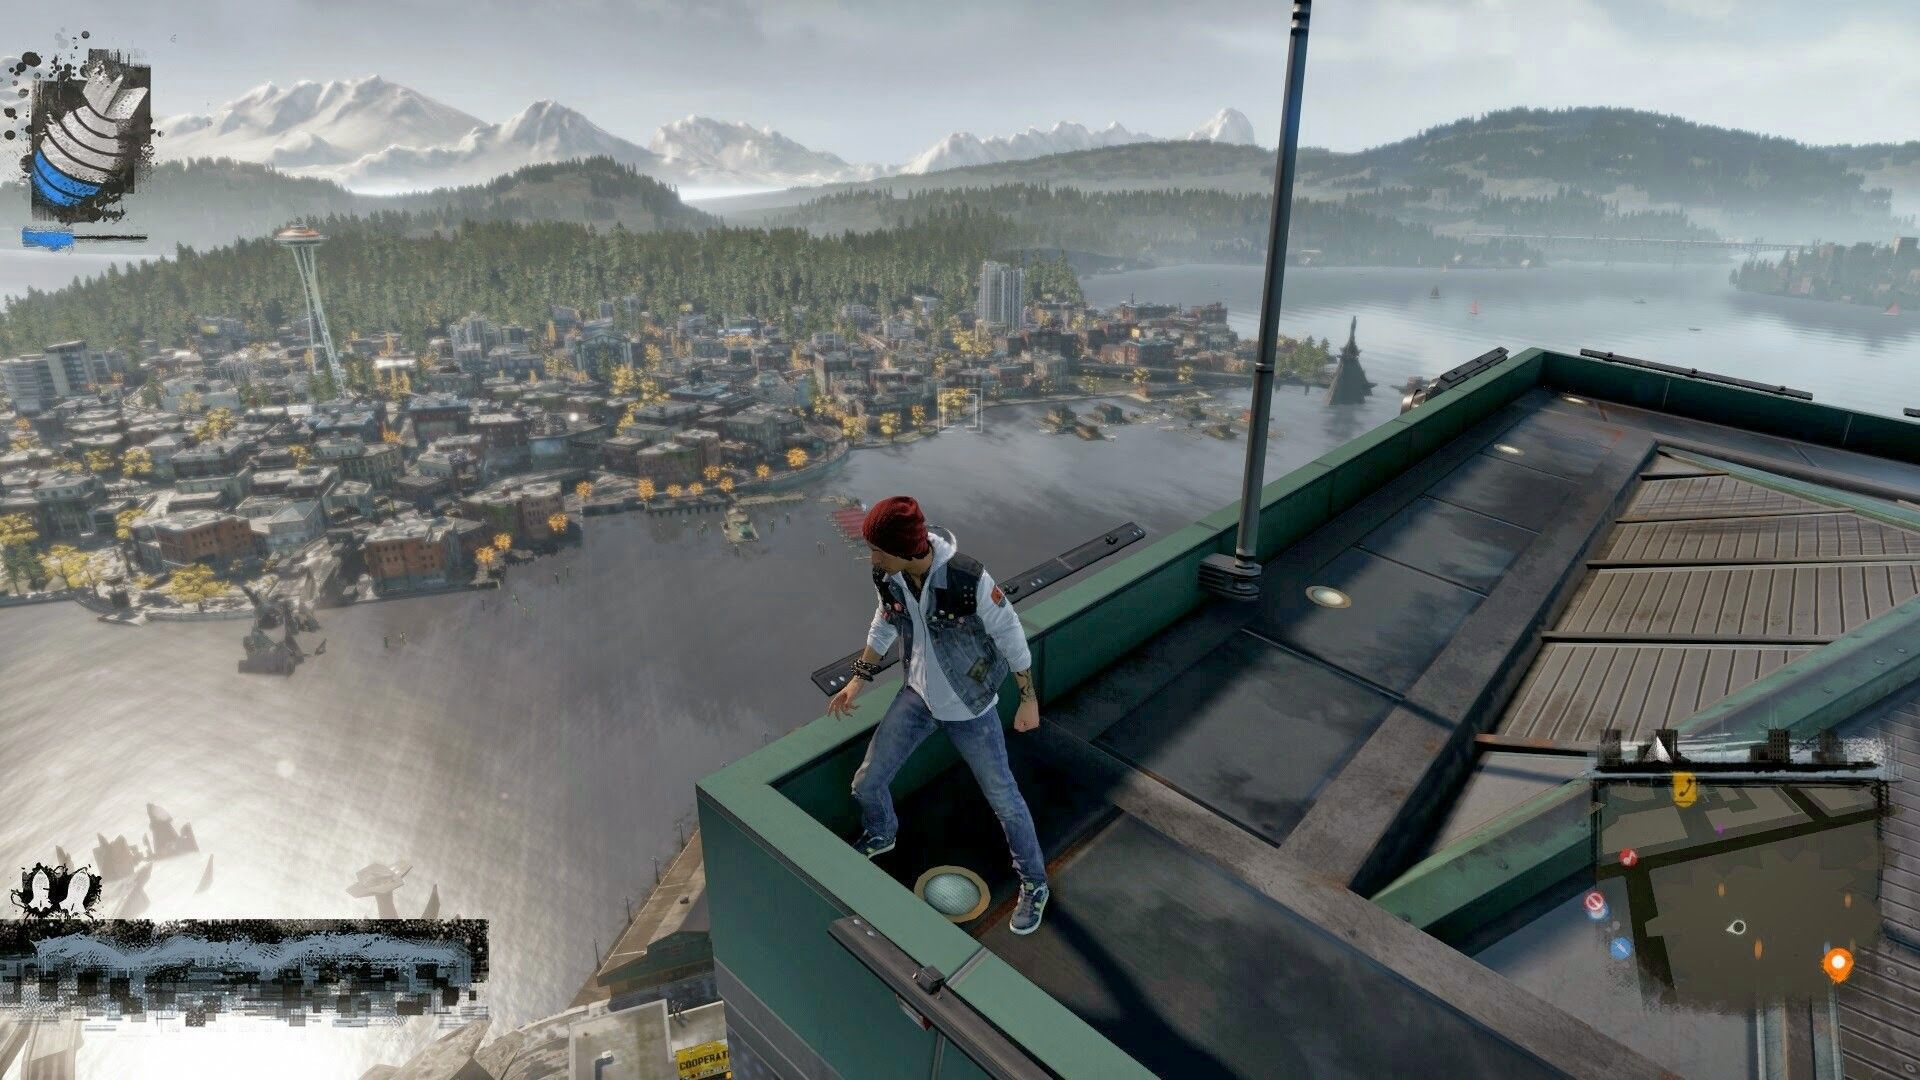 New son son 2. Infamous: second son. Infamous second son Map. Infamous second son карта. Infamous открытый мир.